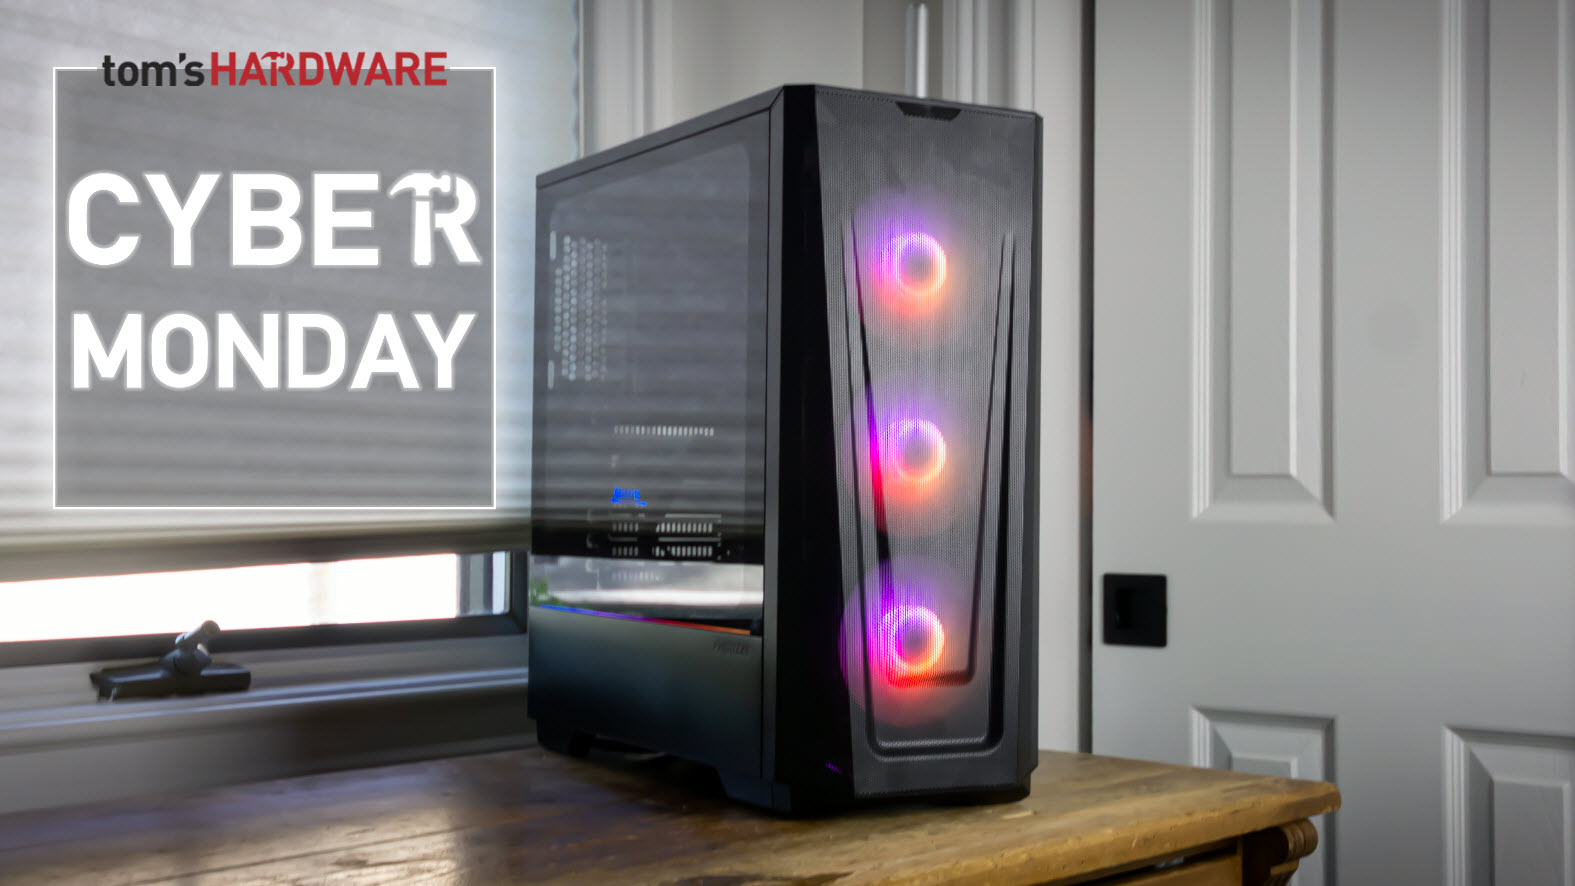 You can build a 4K-capable Cyber Monday gaming PC for $1,000 Less than the cost of an RTX 4090